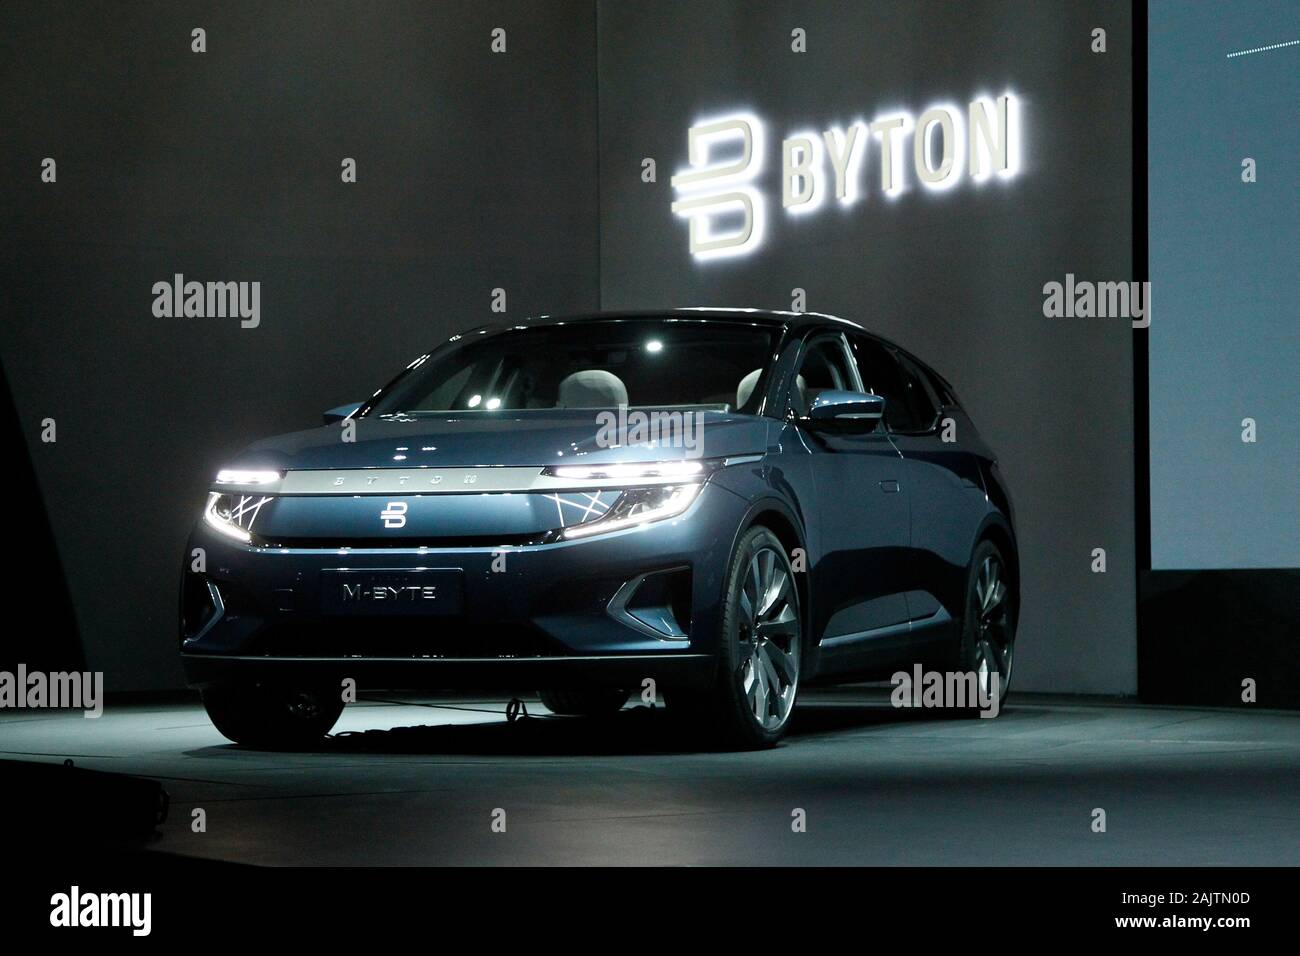 Las Vegas, United States. 05th Jan, 2020. The new production model M-Byte electric smart car by BYTON is unvielded during the 2020 International CES, at the Mandalay Bay Convention Center in Las Vegas, Nevada on Sunday, January 5, 2020. Photo by James Atoa/UPI Credit: UPI/Alamy Live News Stock Photo